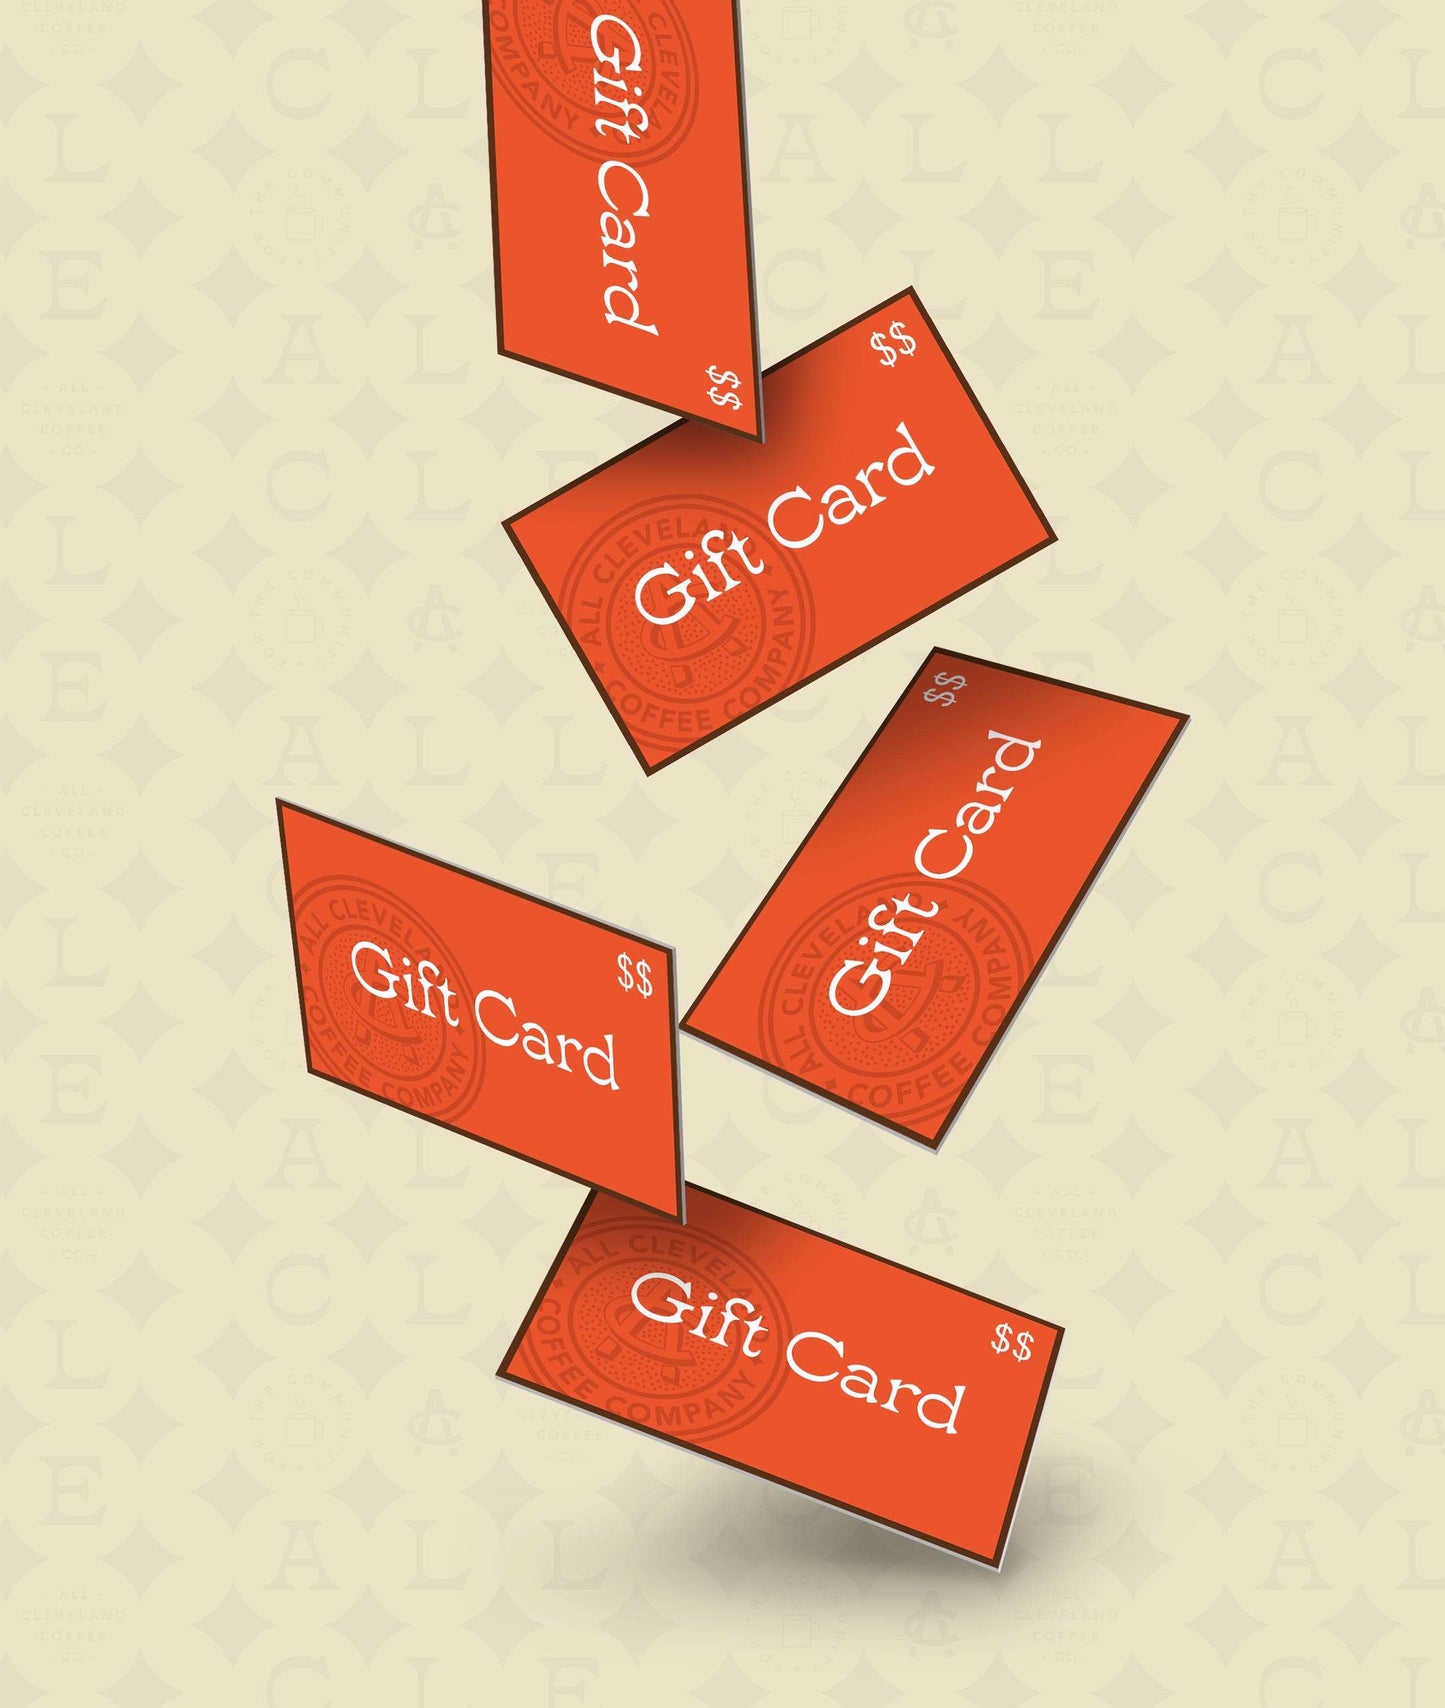 All Cleveland Coffee *Give* Card